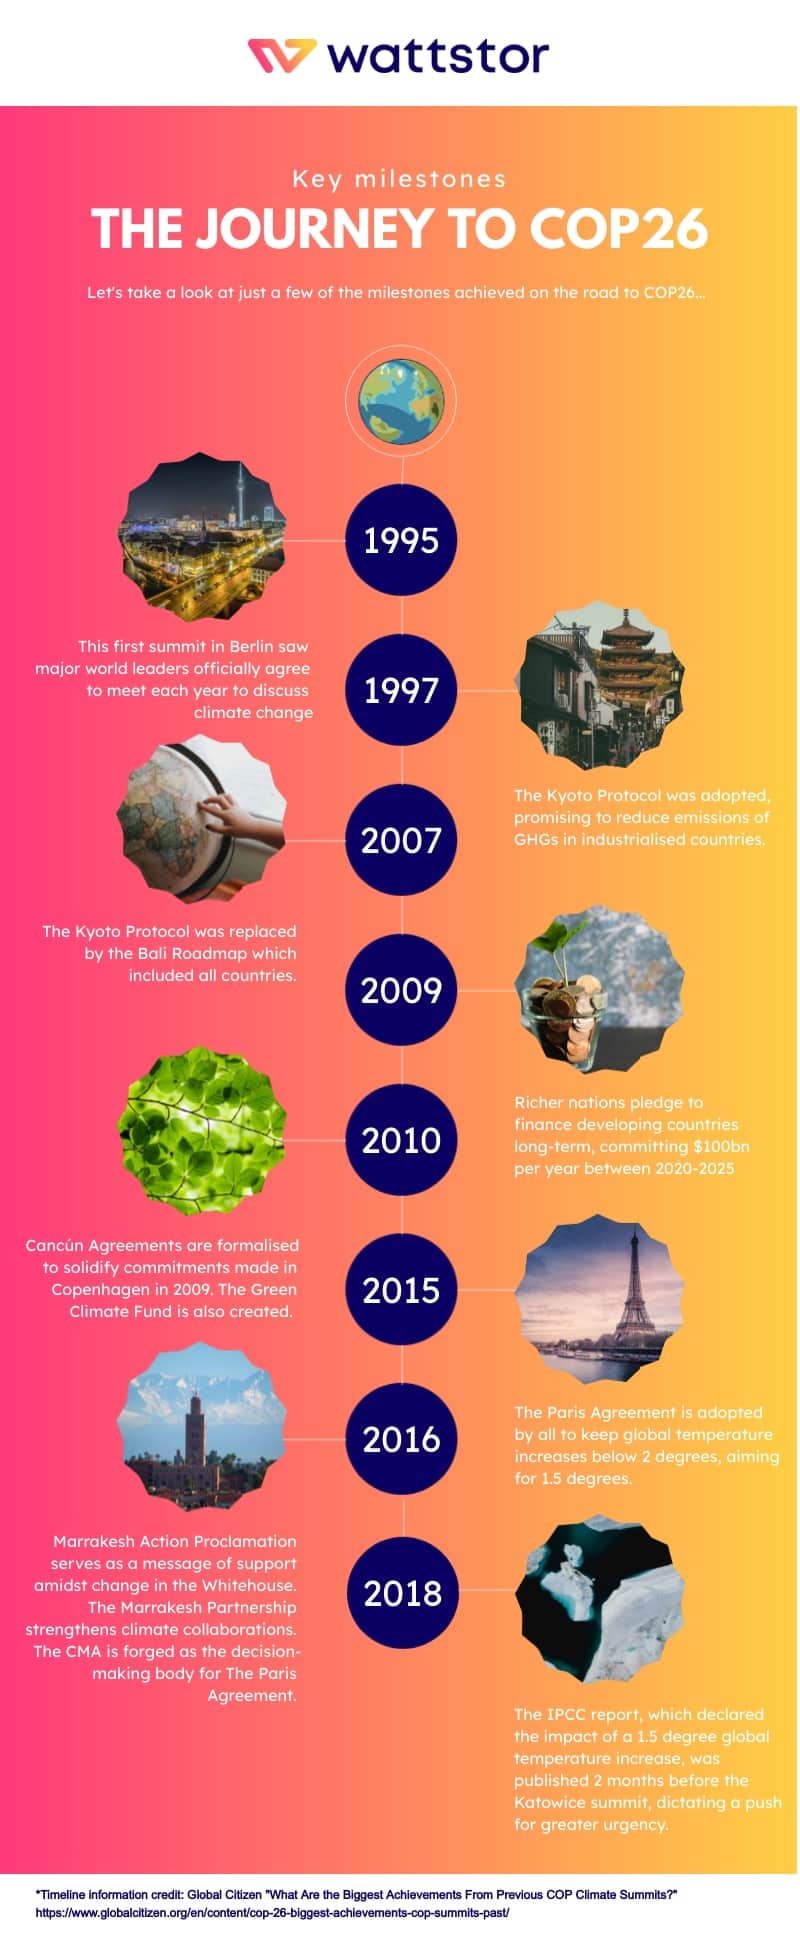 A timeline showing the milestones prior to COP26